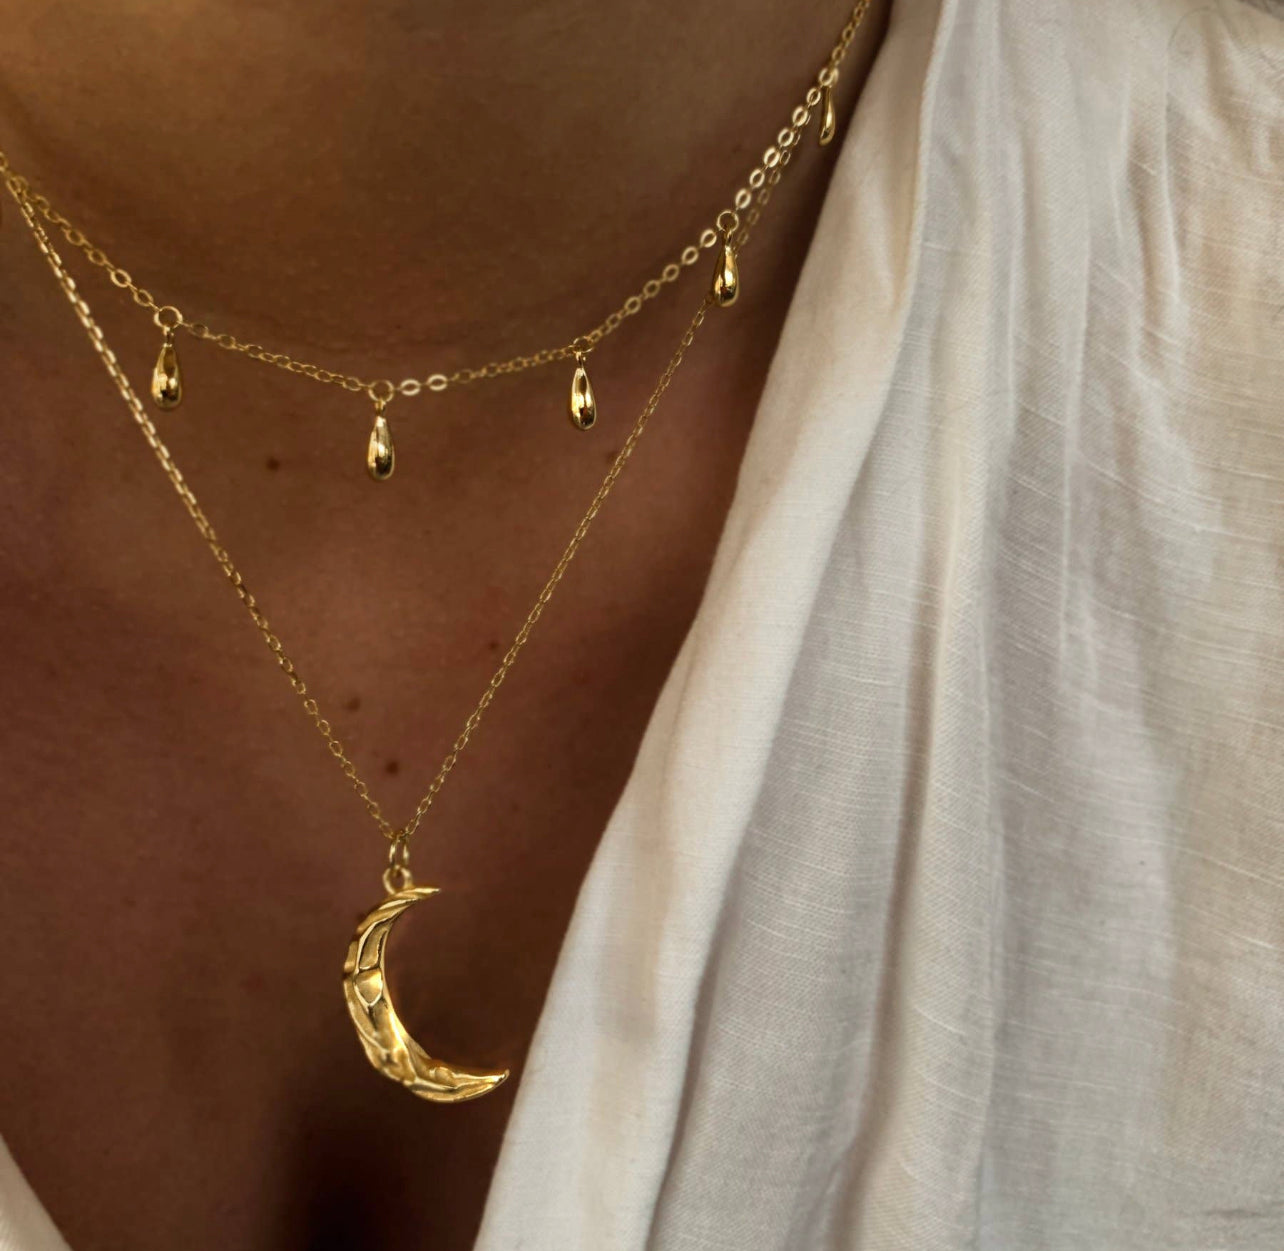 Stay Wild Moon-child Necklace